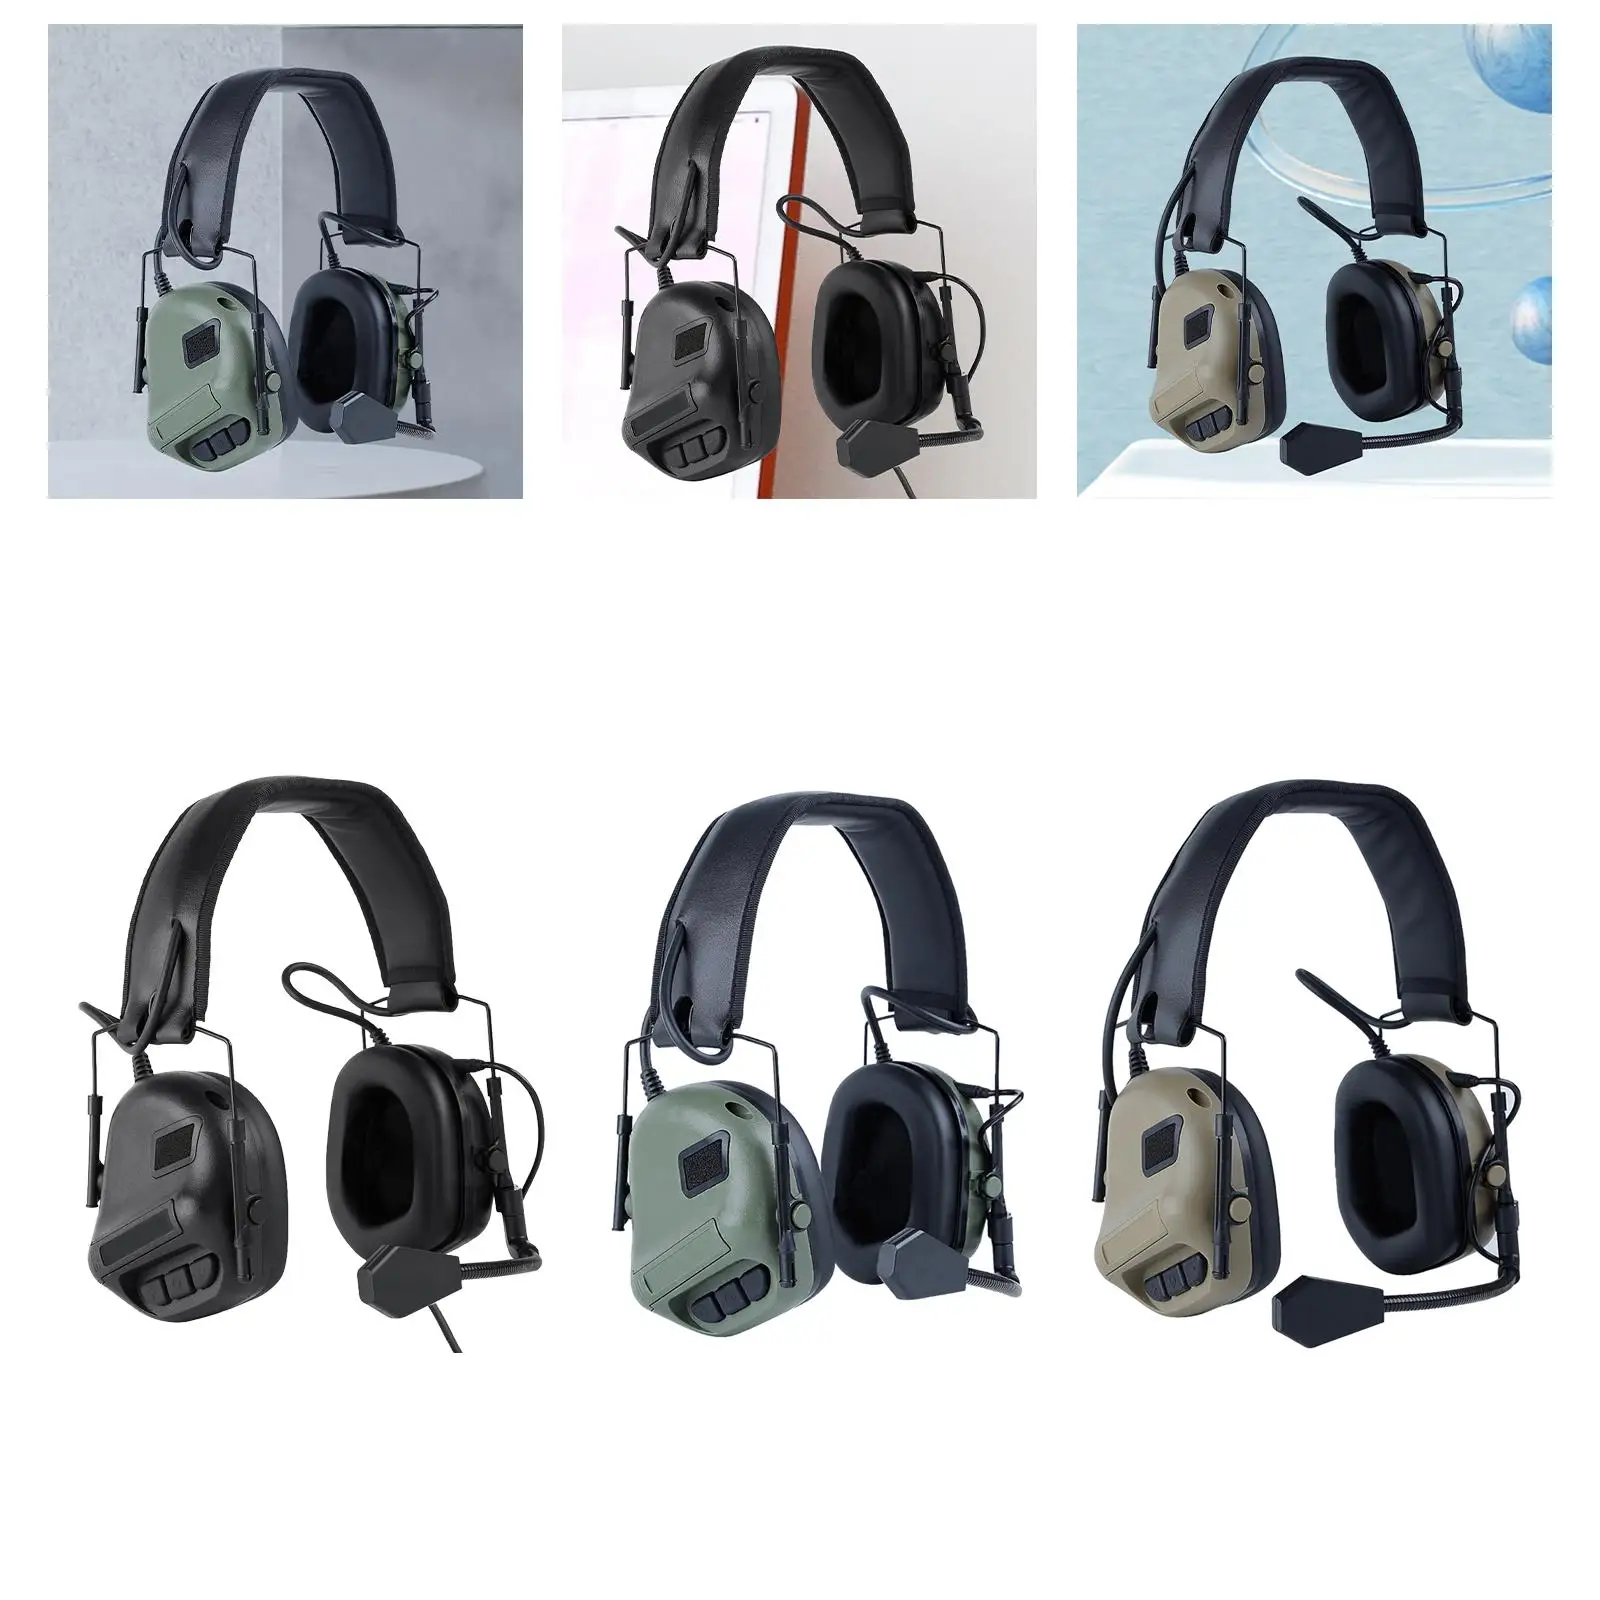 Hearing Ear Protection Compact Comfortable Ear Protector Soft Ear Cups for Construction Sleeping Manufacturing Business Studying